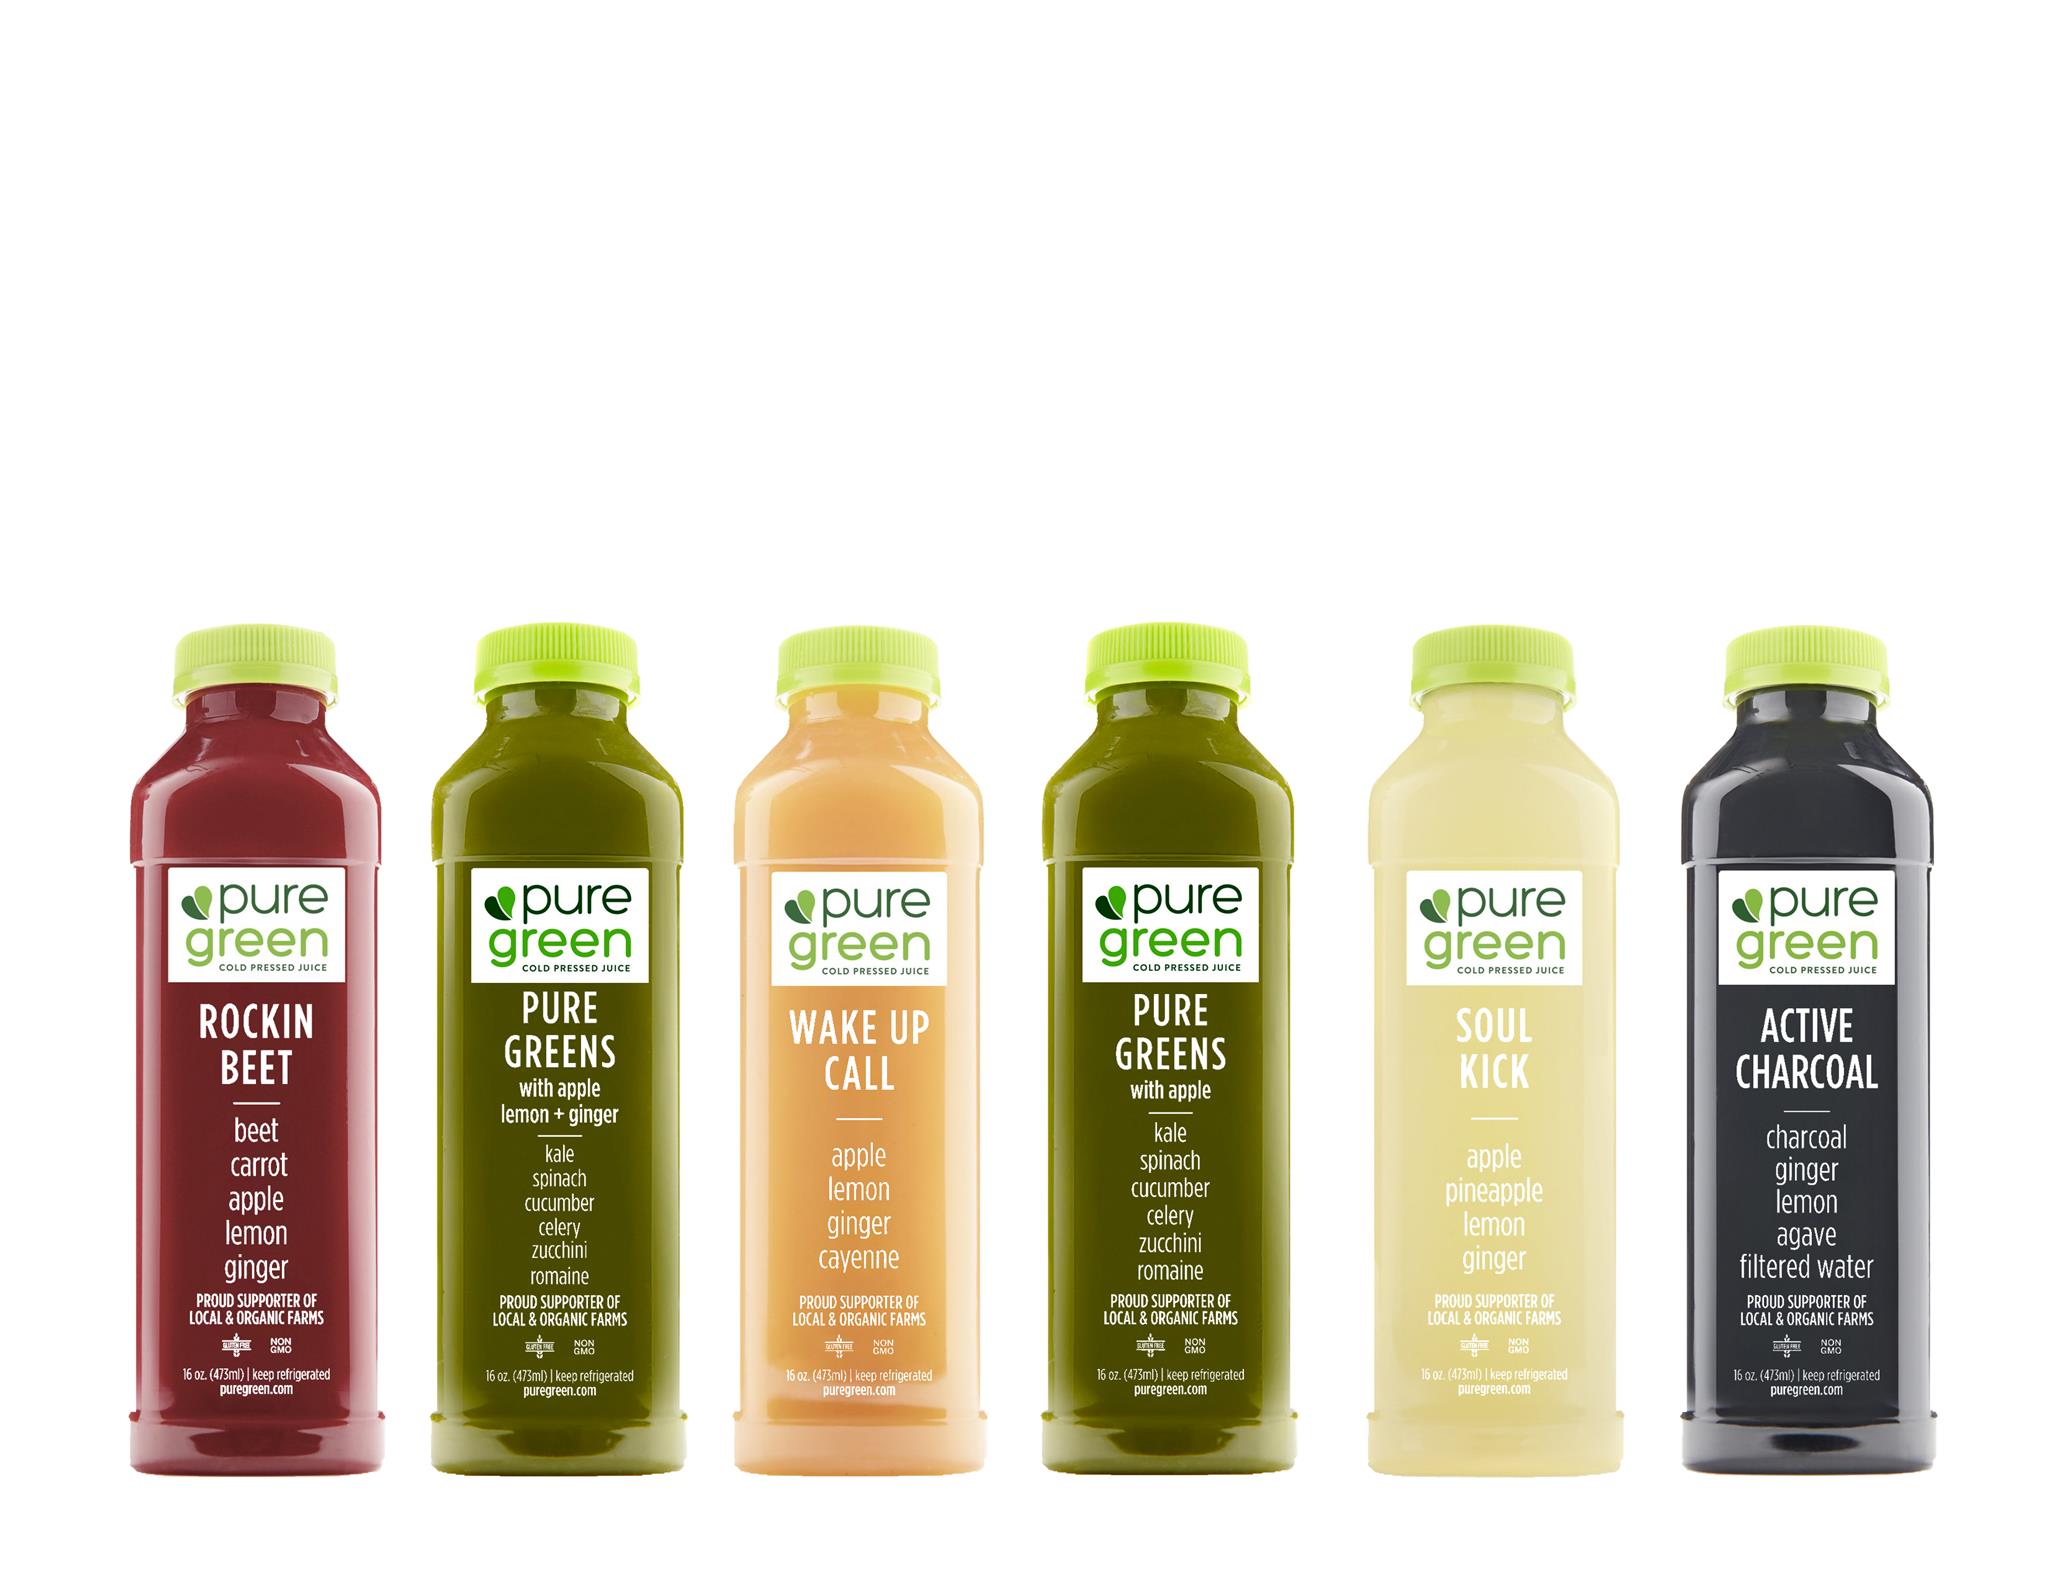 Dherbs Teams Up With Pure Green For New 3-Day Juice Cleanse